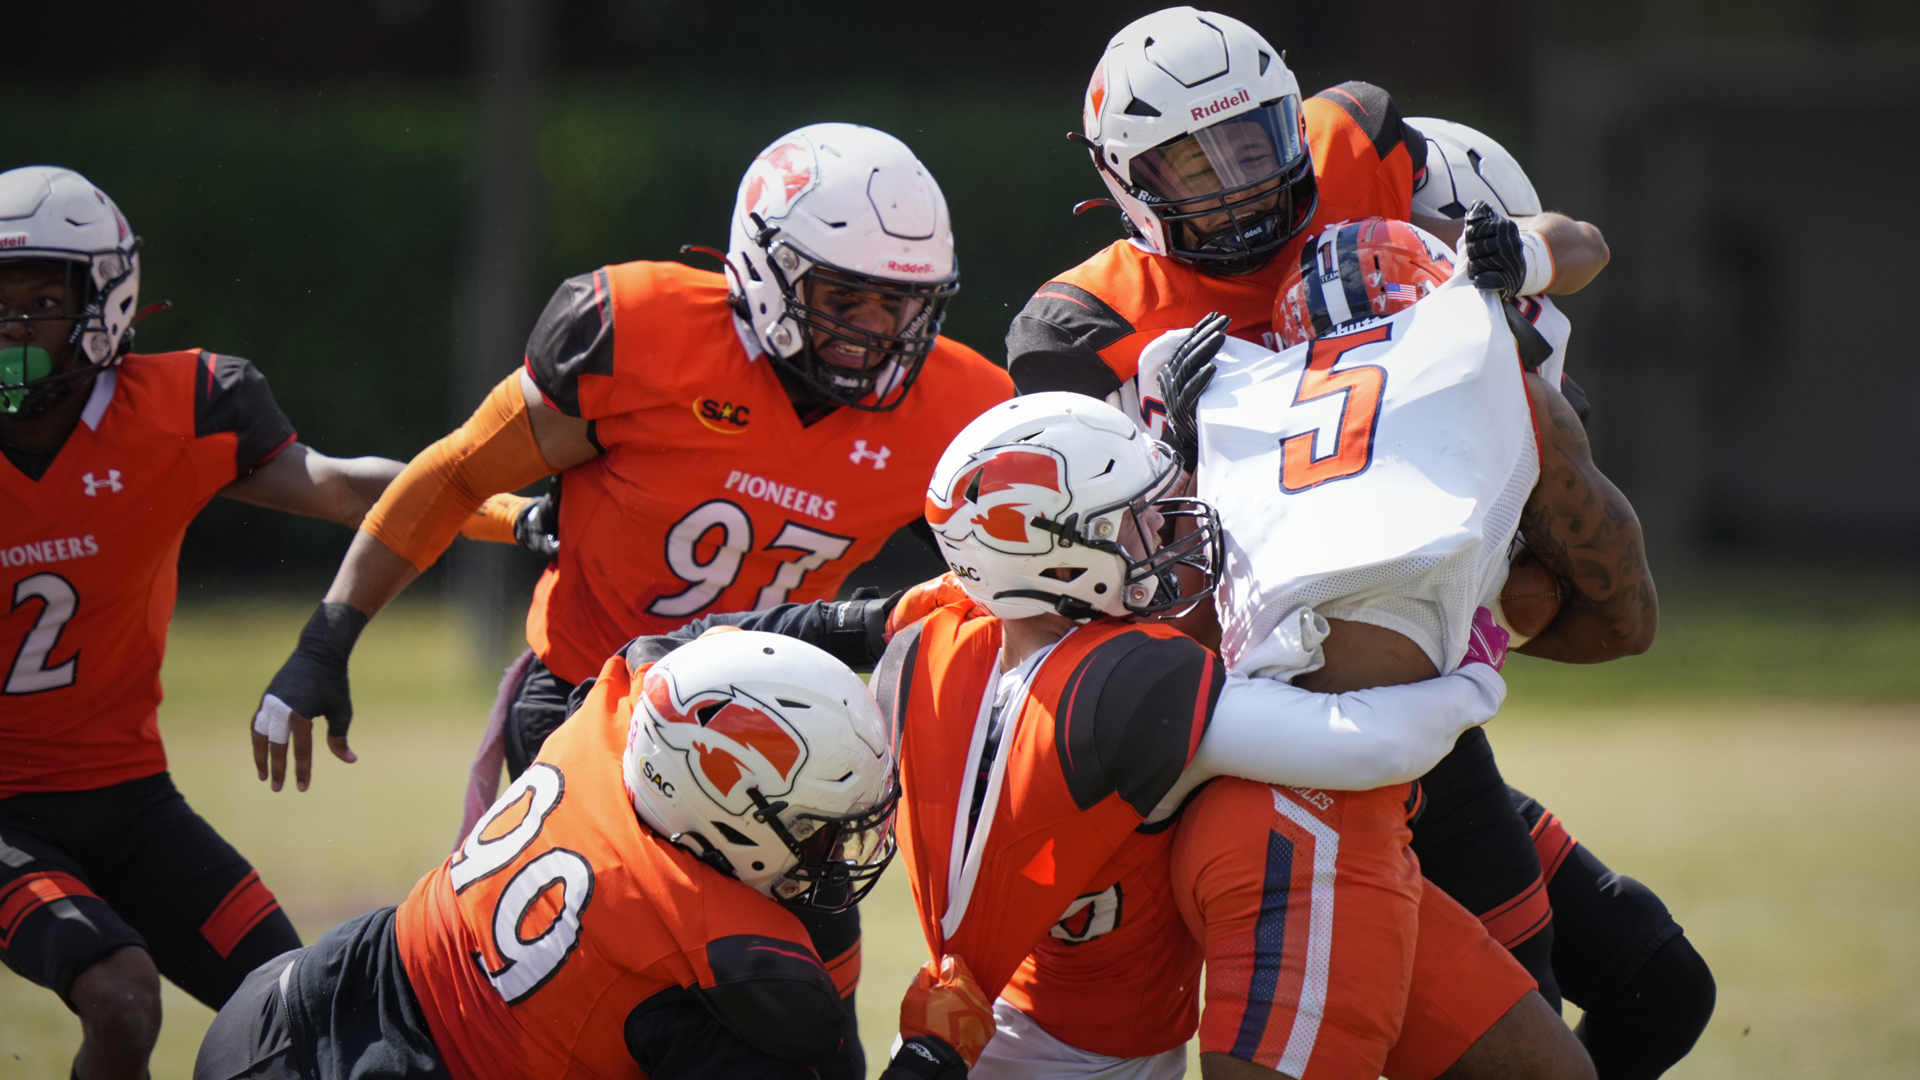 Tusculum travels to Mars Hill to battle for SAC Mountain Division title Saturday